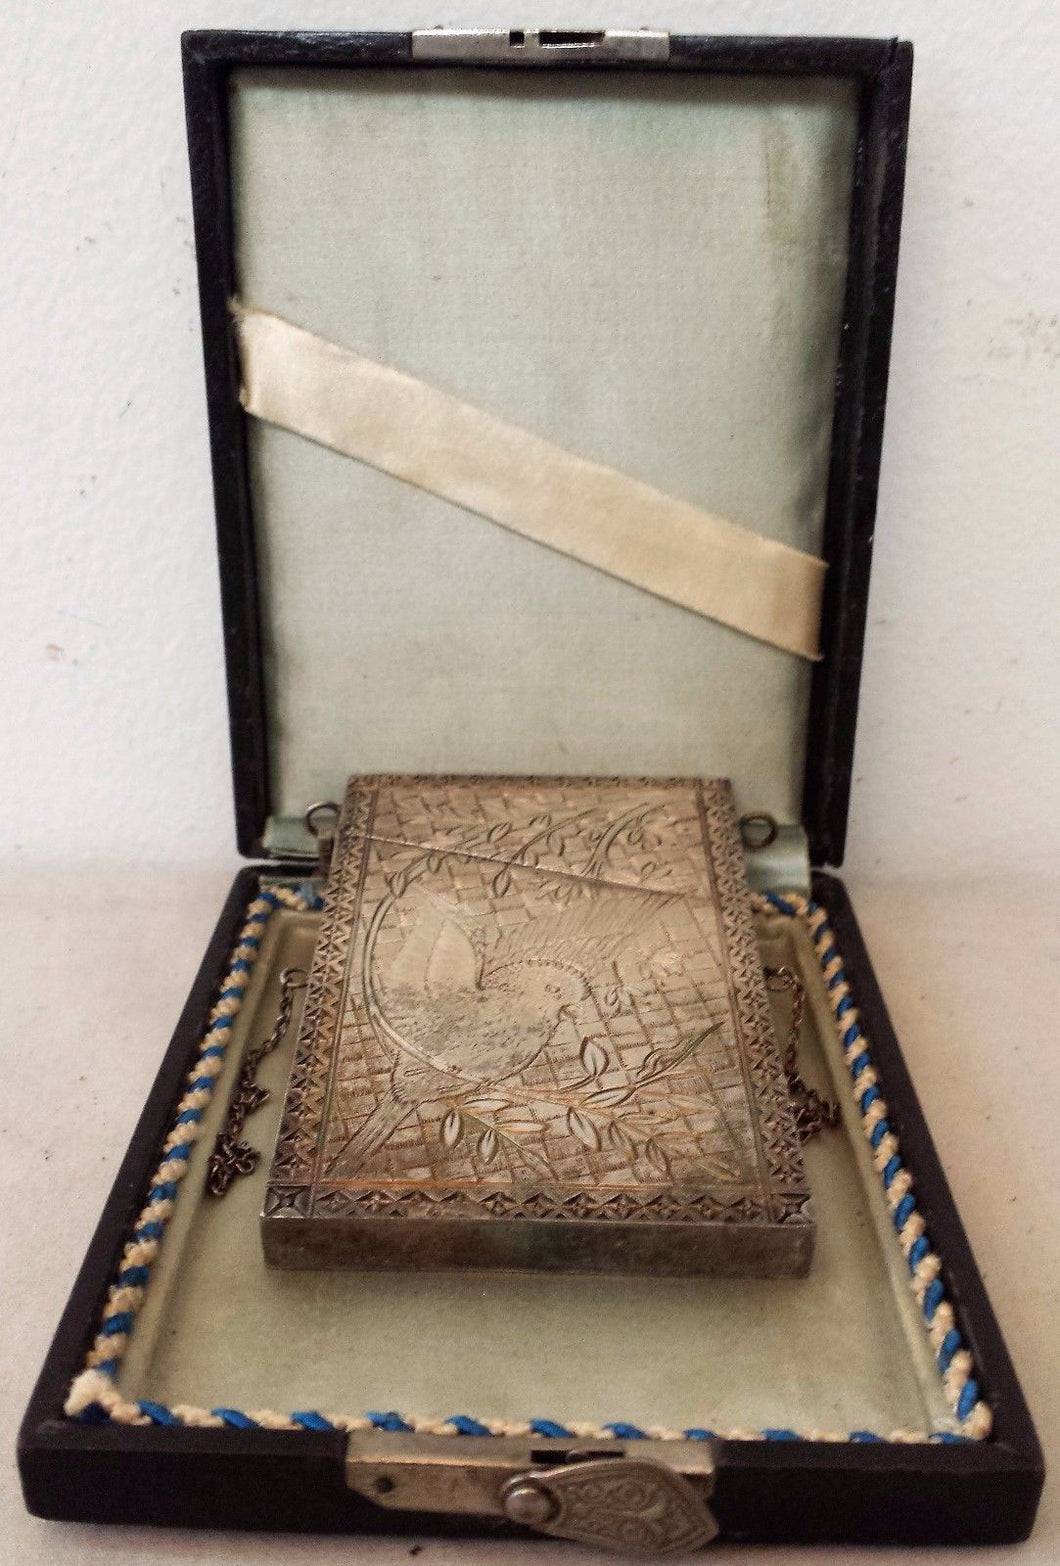 VICTORIAN / ART NOUVEAU SILVER ENGRAVED GREETING CARD HOLDER